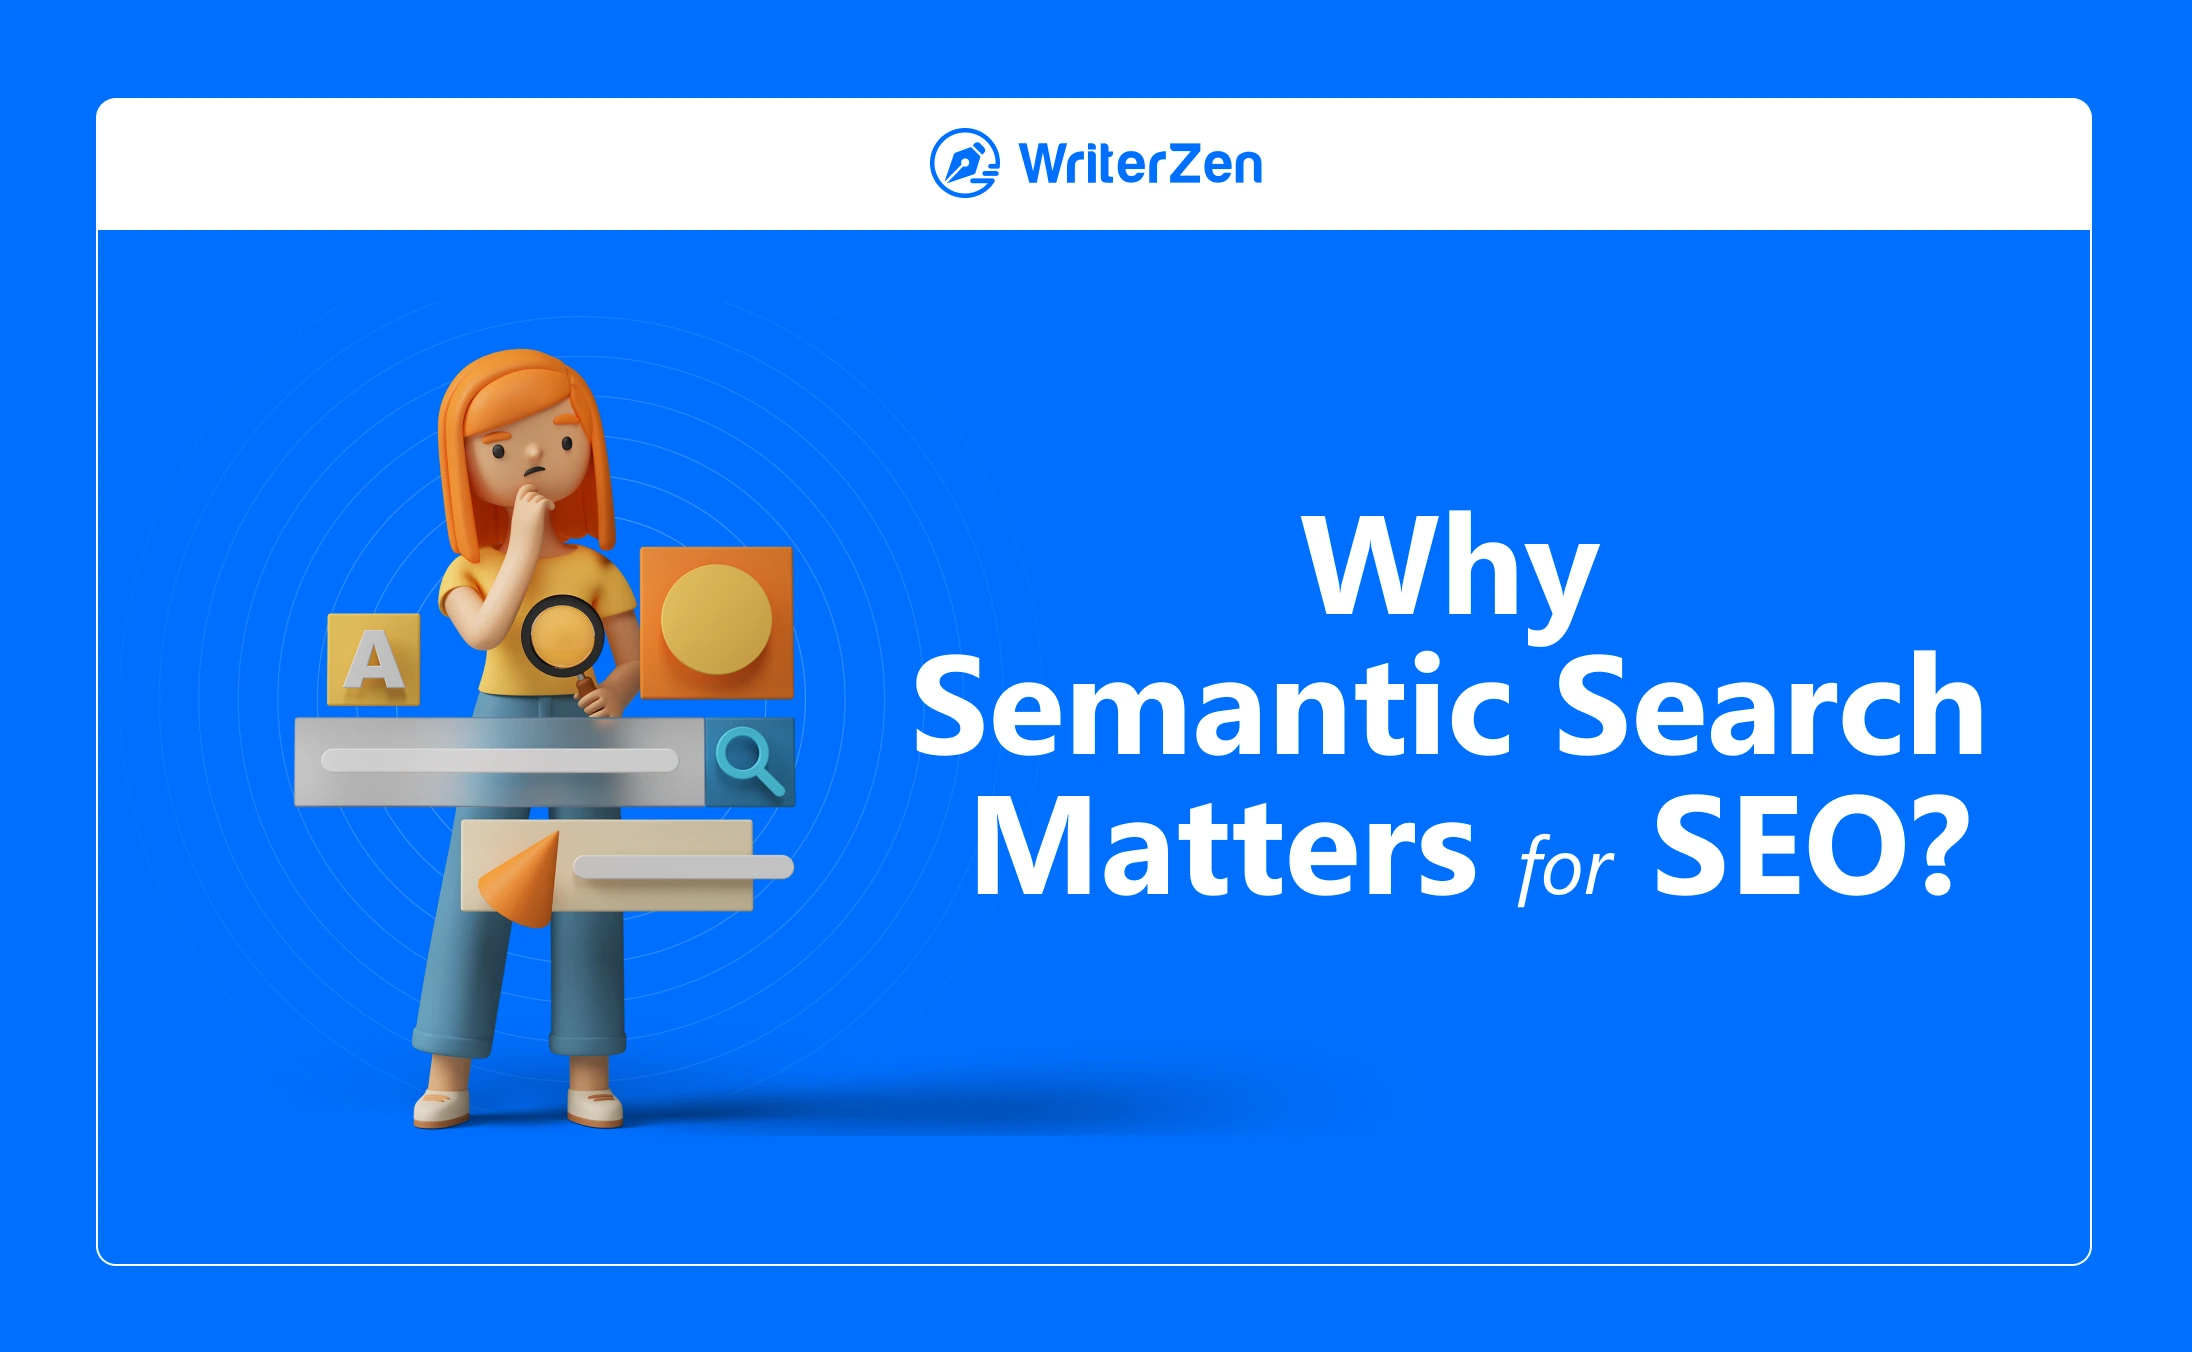 Why Semantic Search Matters for SEO?